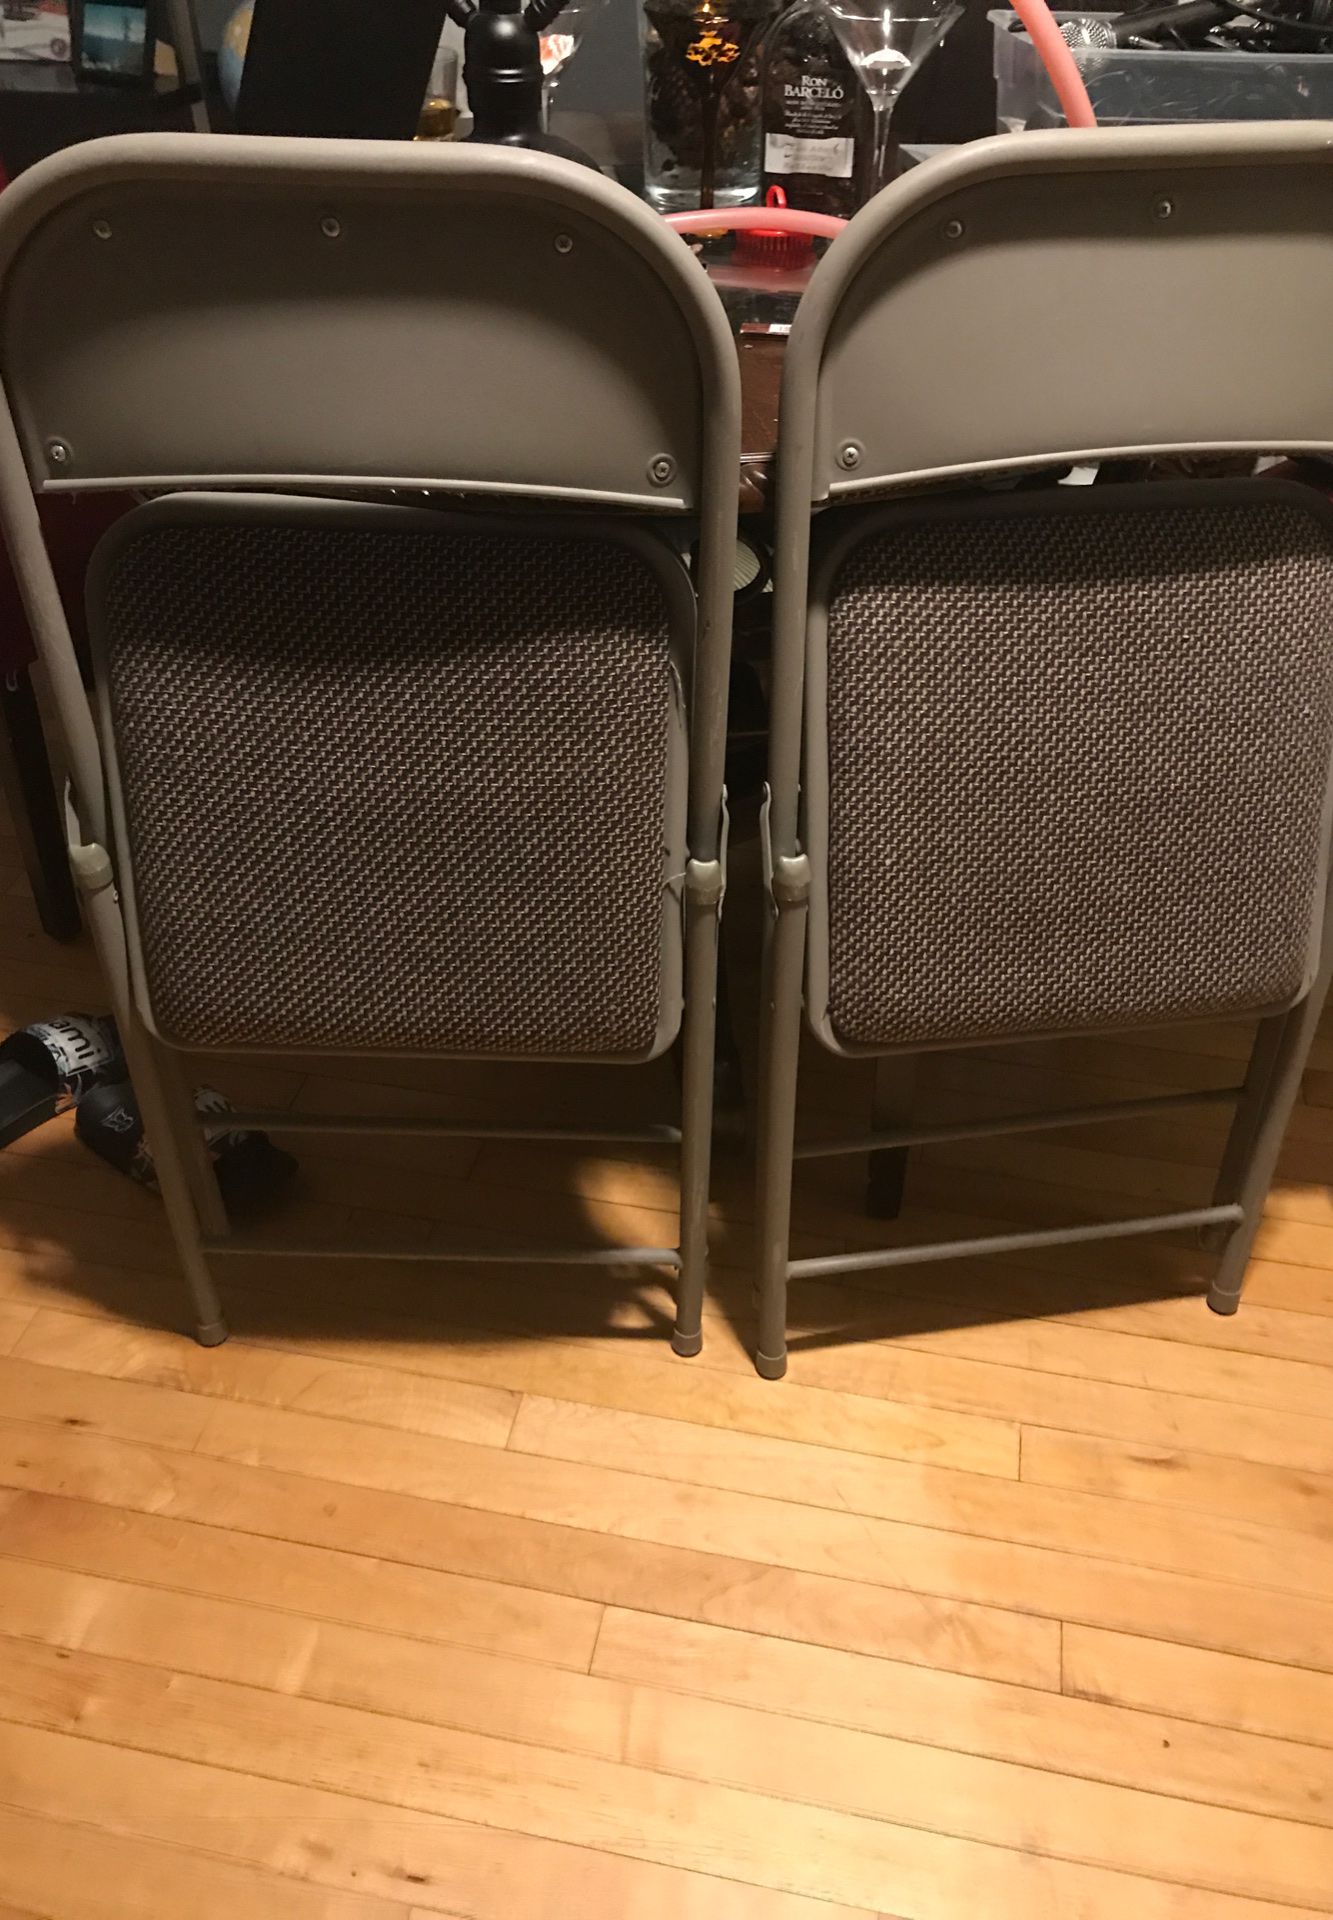 19 used chairs